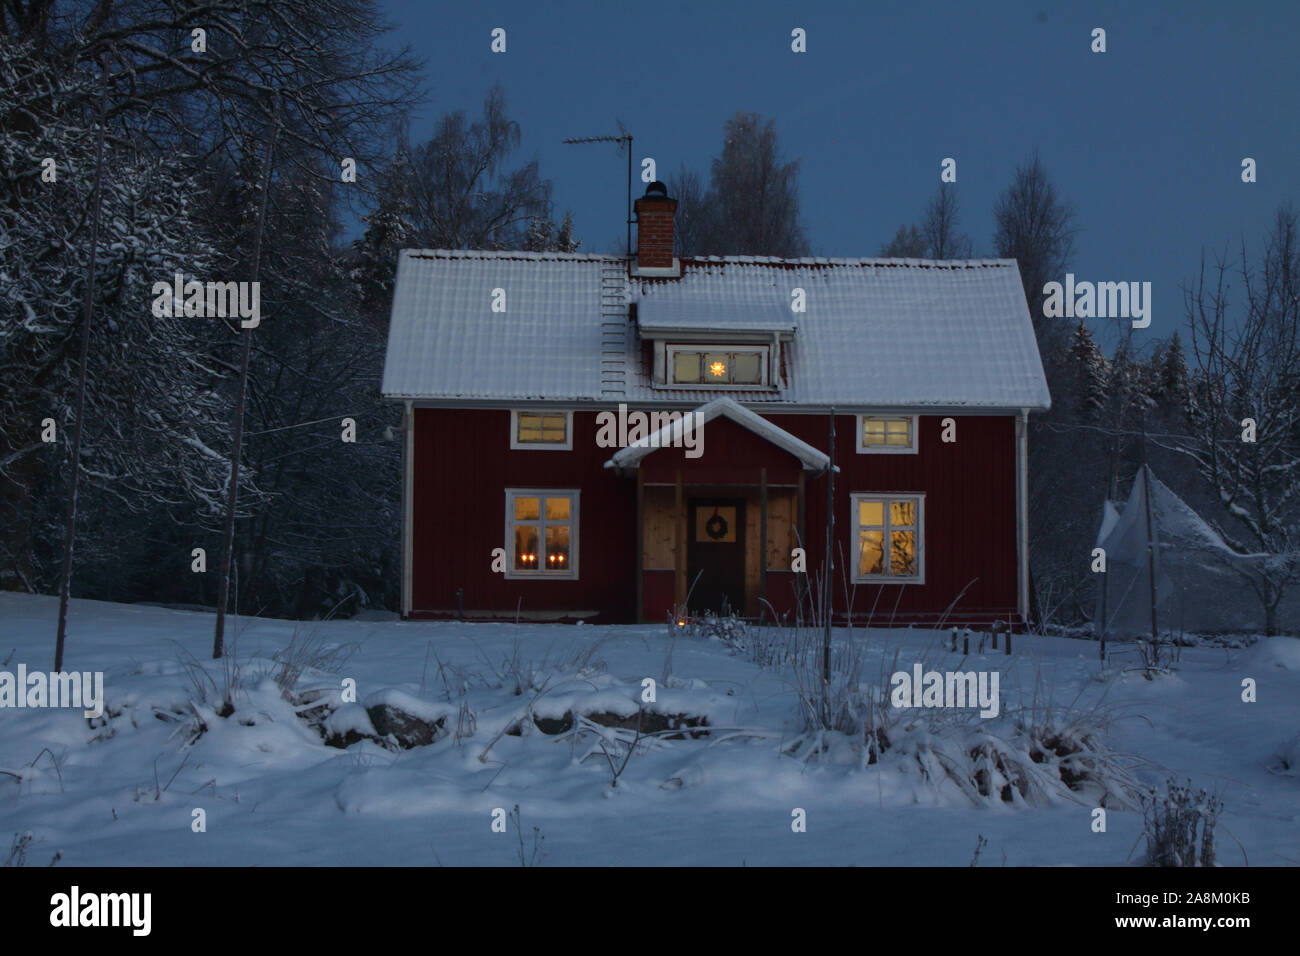 Wooden house during winter night and dark blue sky in Sweden, Arboga. Stock Photo